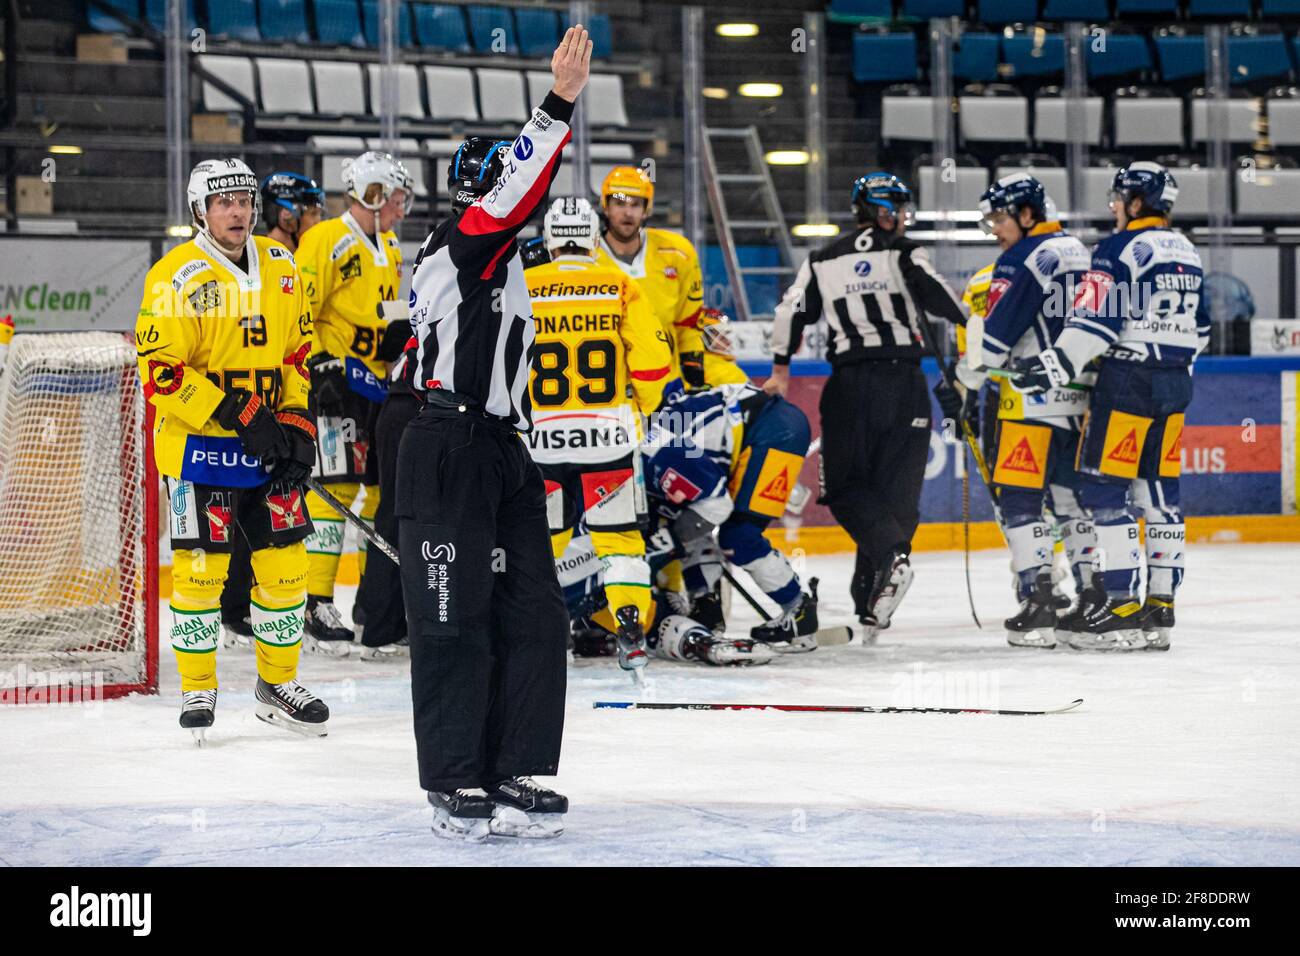 Bossard Arena, Zug, April 13th, 2021  A lot of work for the referee quartet around referee Nicolas Fluri (19) and referee Daniel Piechaczek (24) during the National League Playoff quarter-final ice hockey game 1 between EV Zug and SC Bern on April 13, 2021 in the Bossard Arena in Zug. (Switzerland/Croatia OUT) Credit: SPP Sport Press Photo. /Alamy Live News Stock Photo